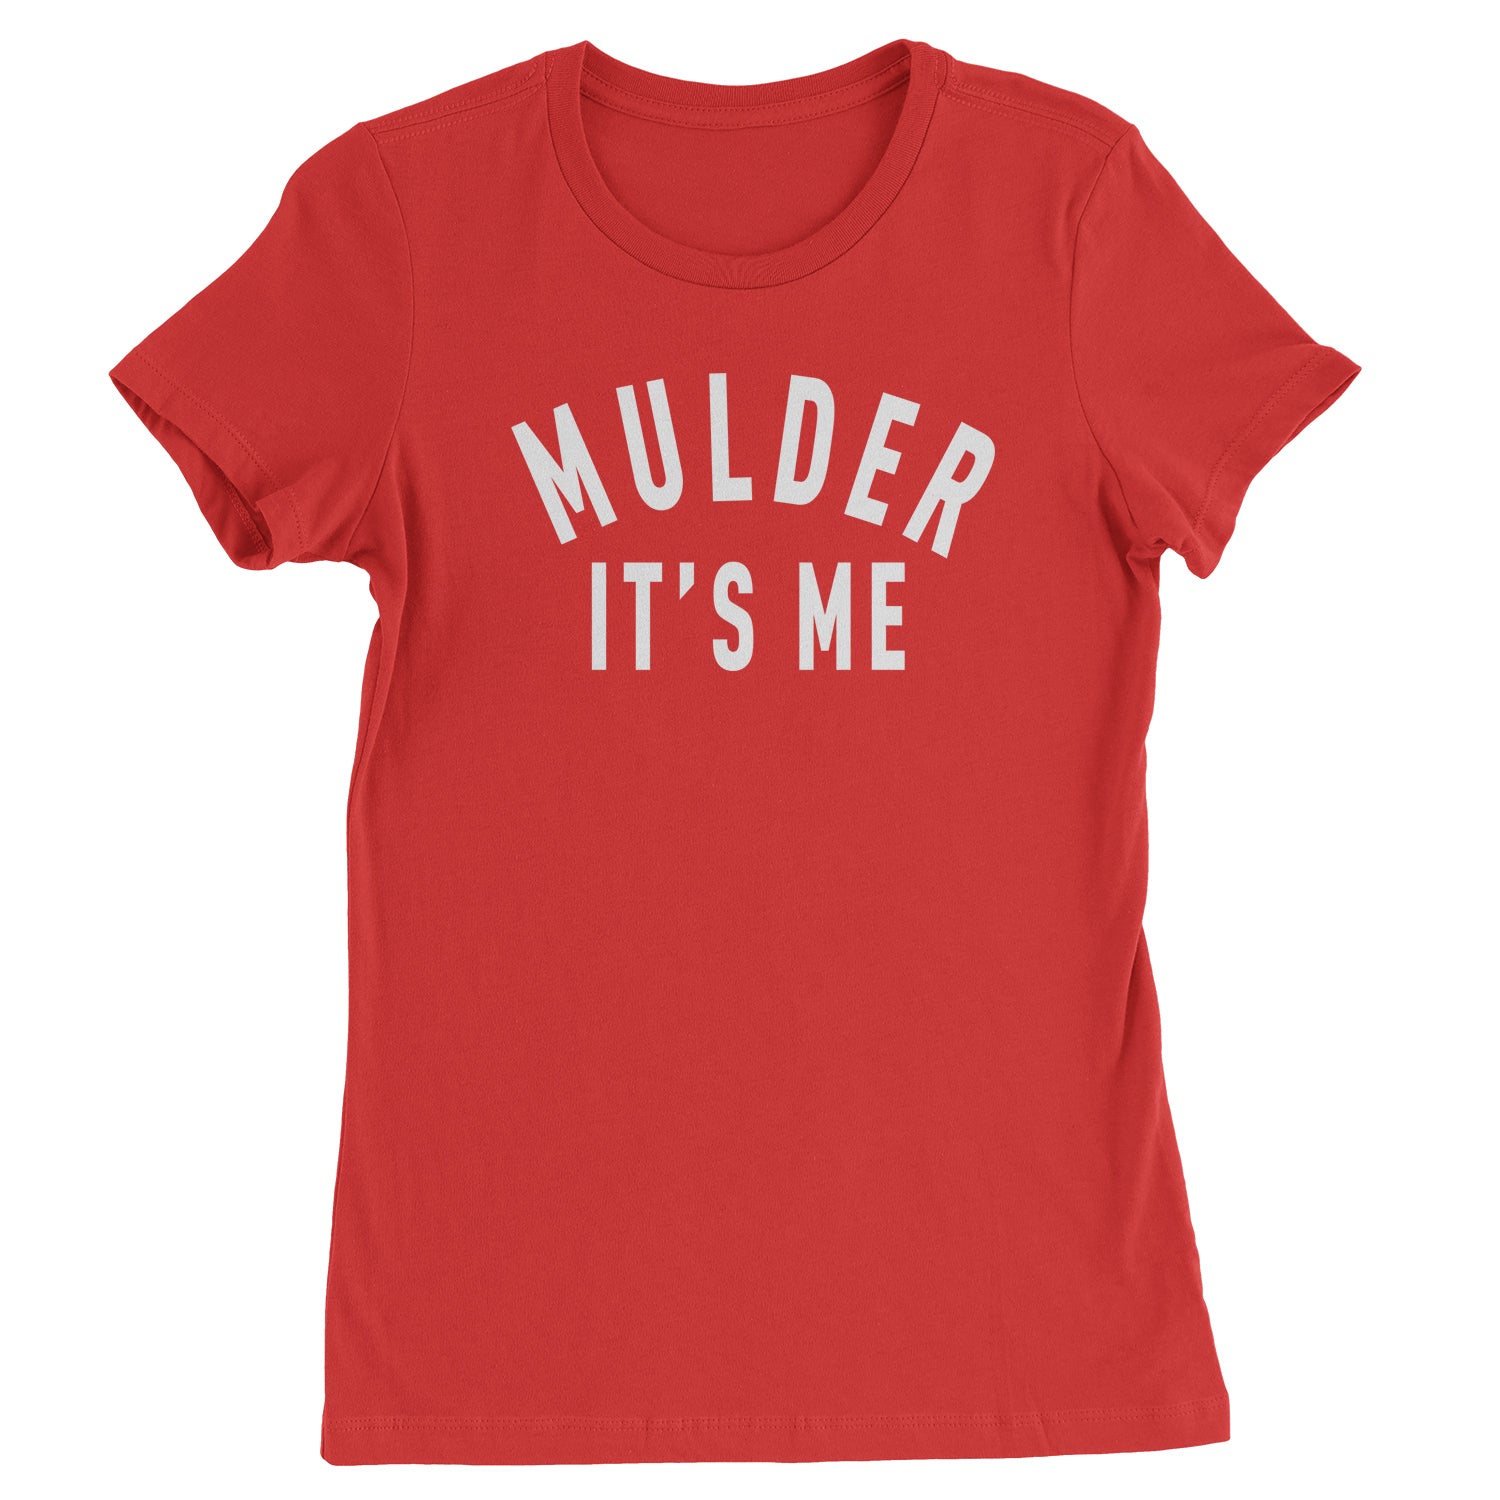 Mulder, It's Me Womens T-shirt 51, area, believe, files, is, mulder, out, scully, the, there, truth, x, xfiles by Expression Tees